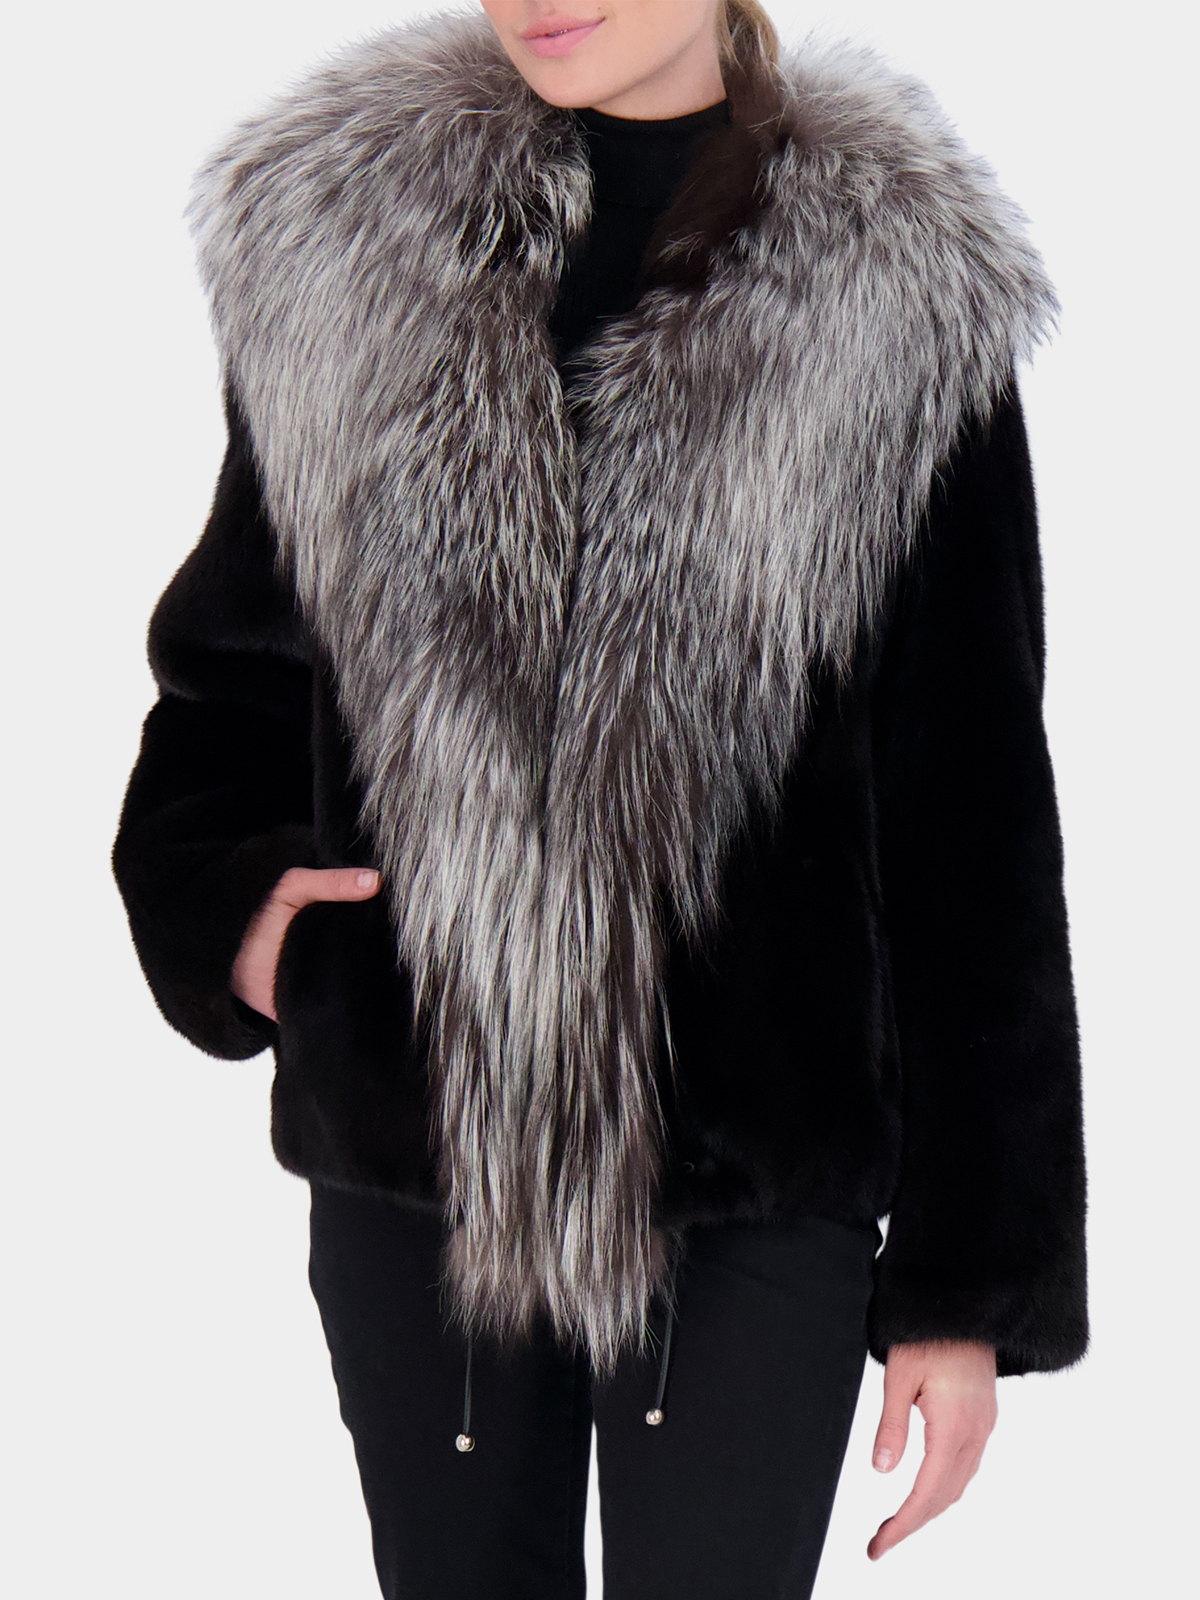 Black Mink Fur Jacket with Silver Fox Collar (Women's Small) - Day Furs